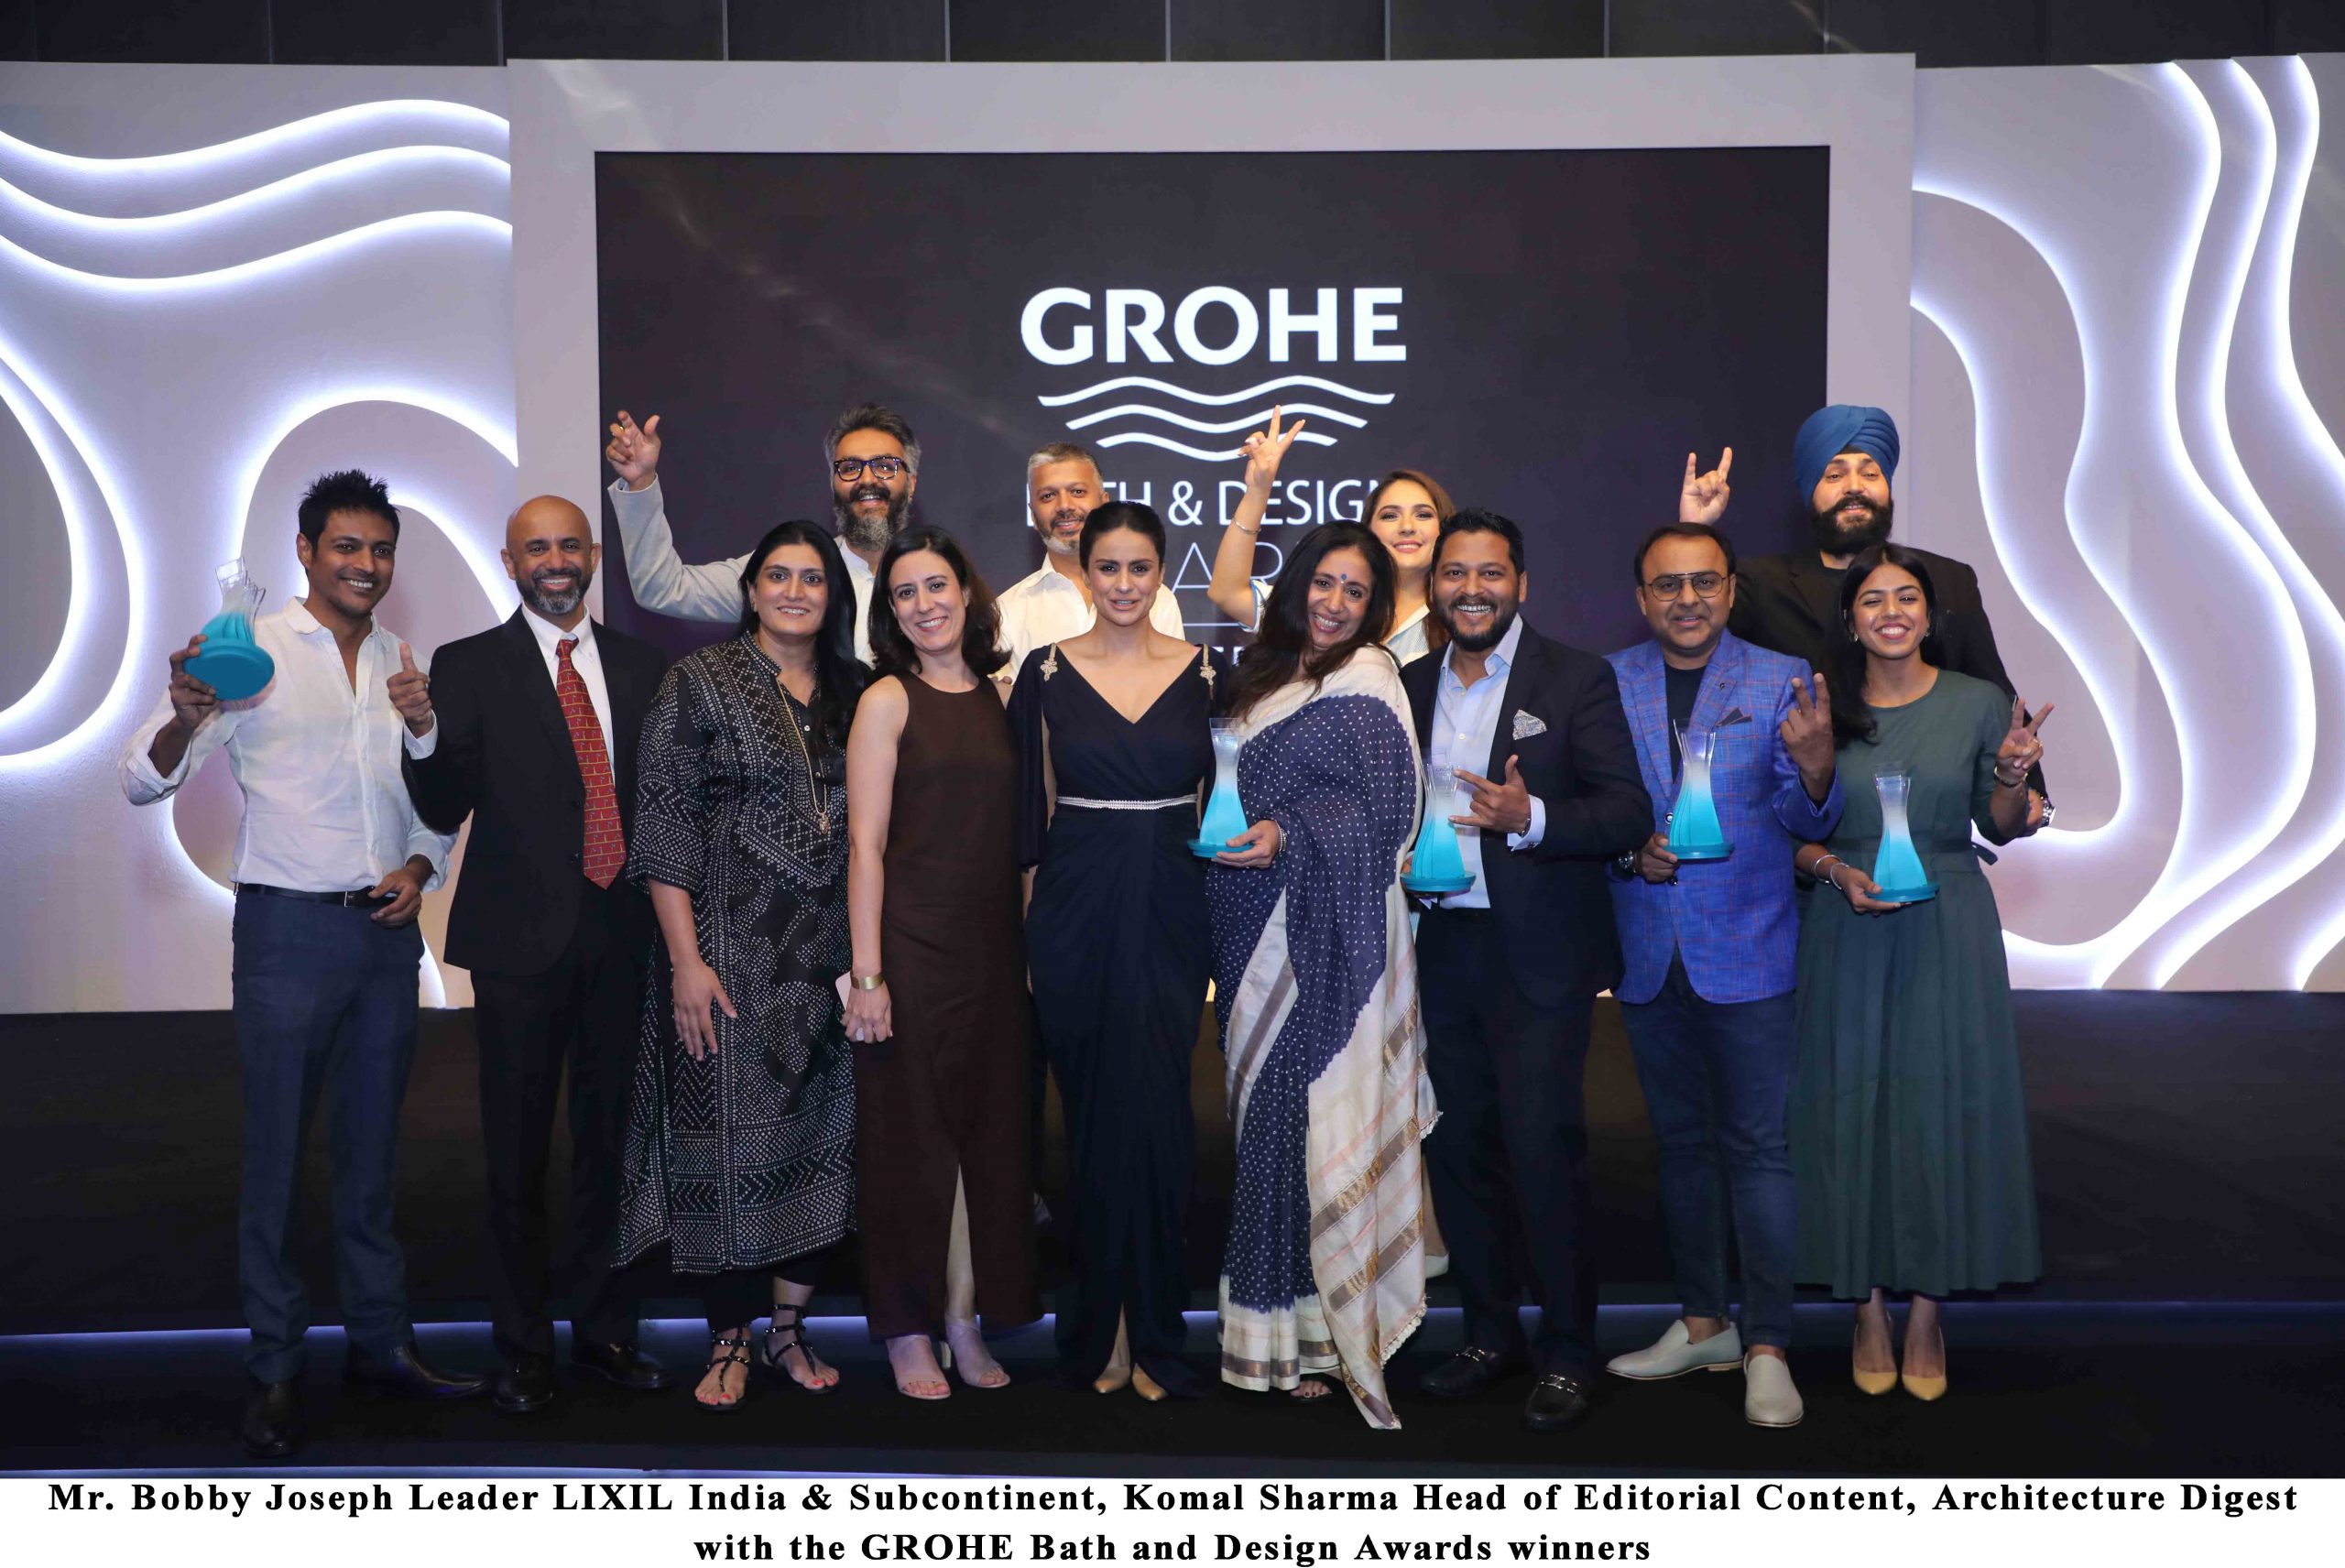 GROHE is back with the latest edition of its Bath and Design Awards